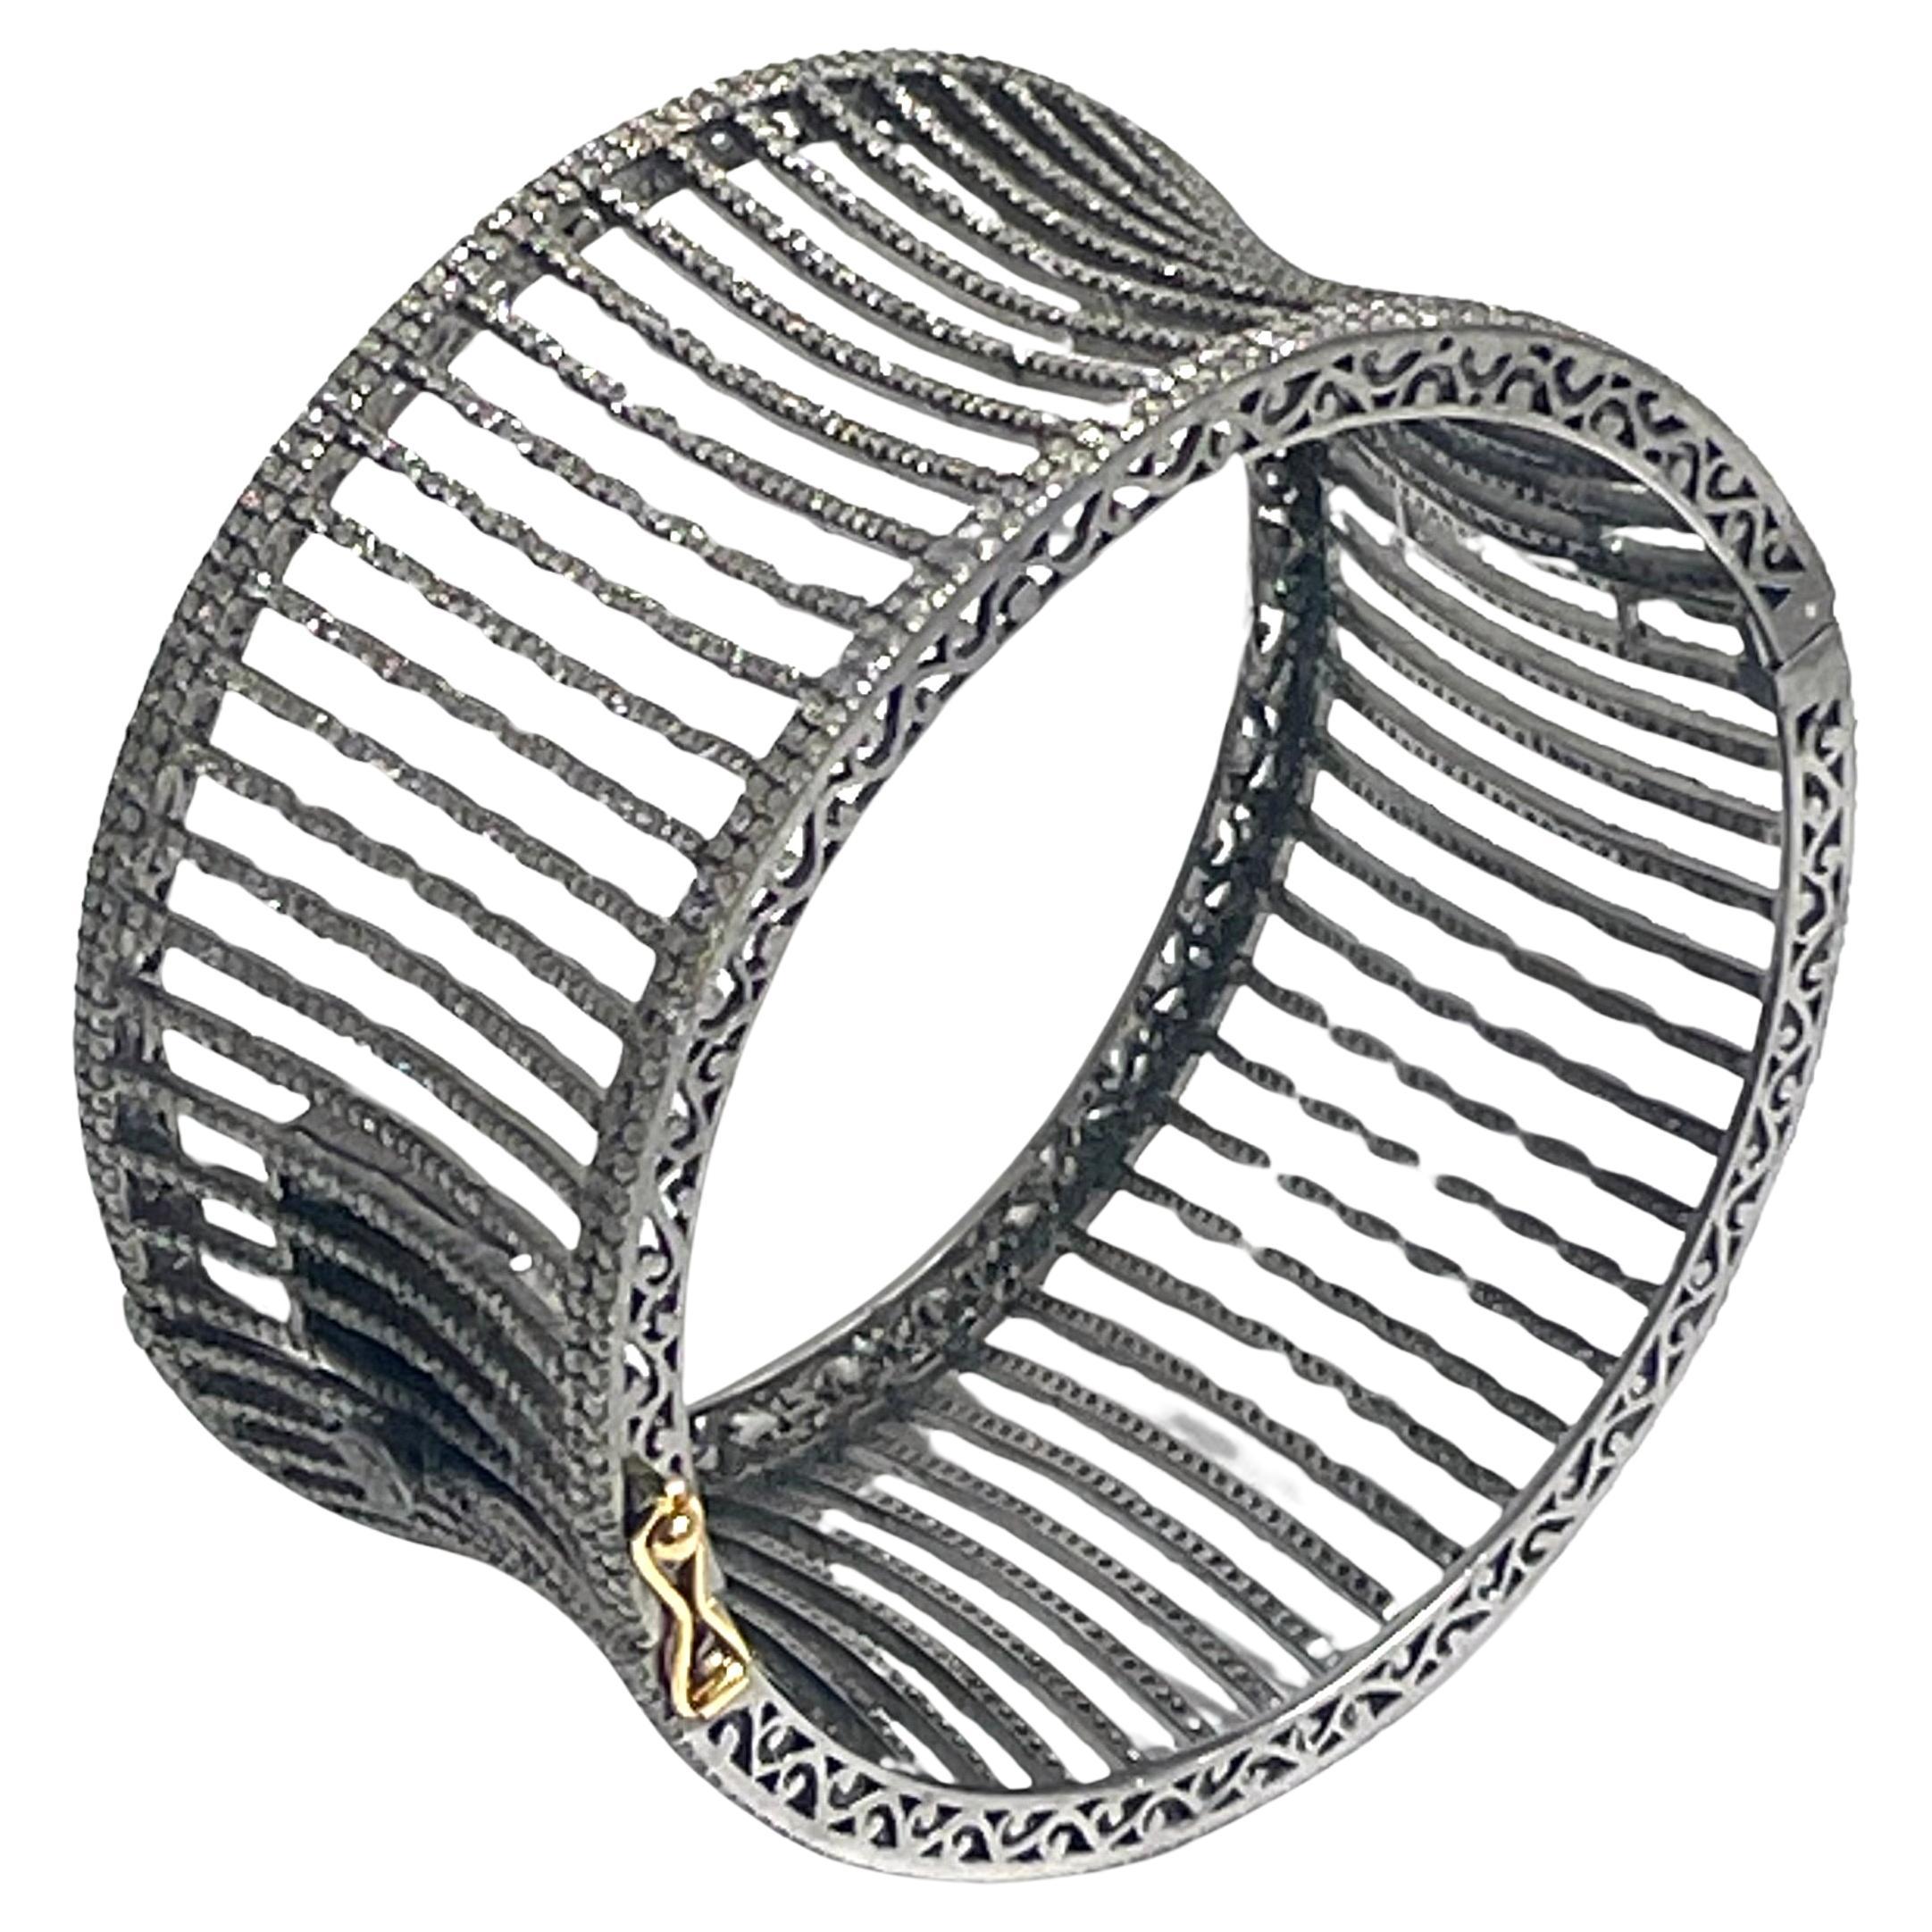 Description
This bracelet screams “I’m enough!” Make a grand entrance and turn heads with this exceptionally stunning statement diamond cuff bracelet. Beautifully designed concave diamond bars are what makes this wide cuff bracelet untraditional and